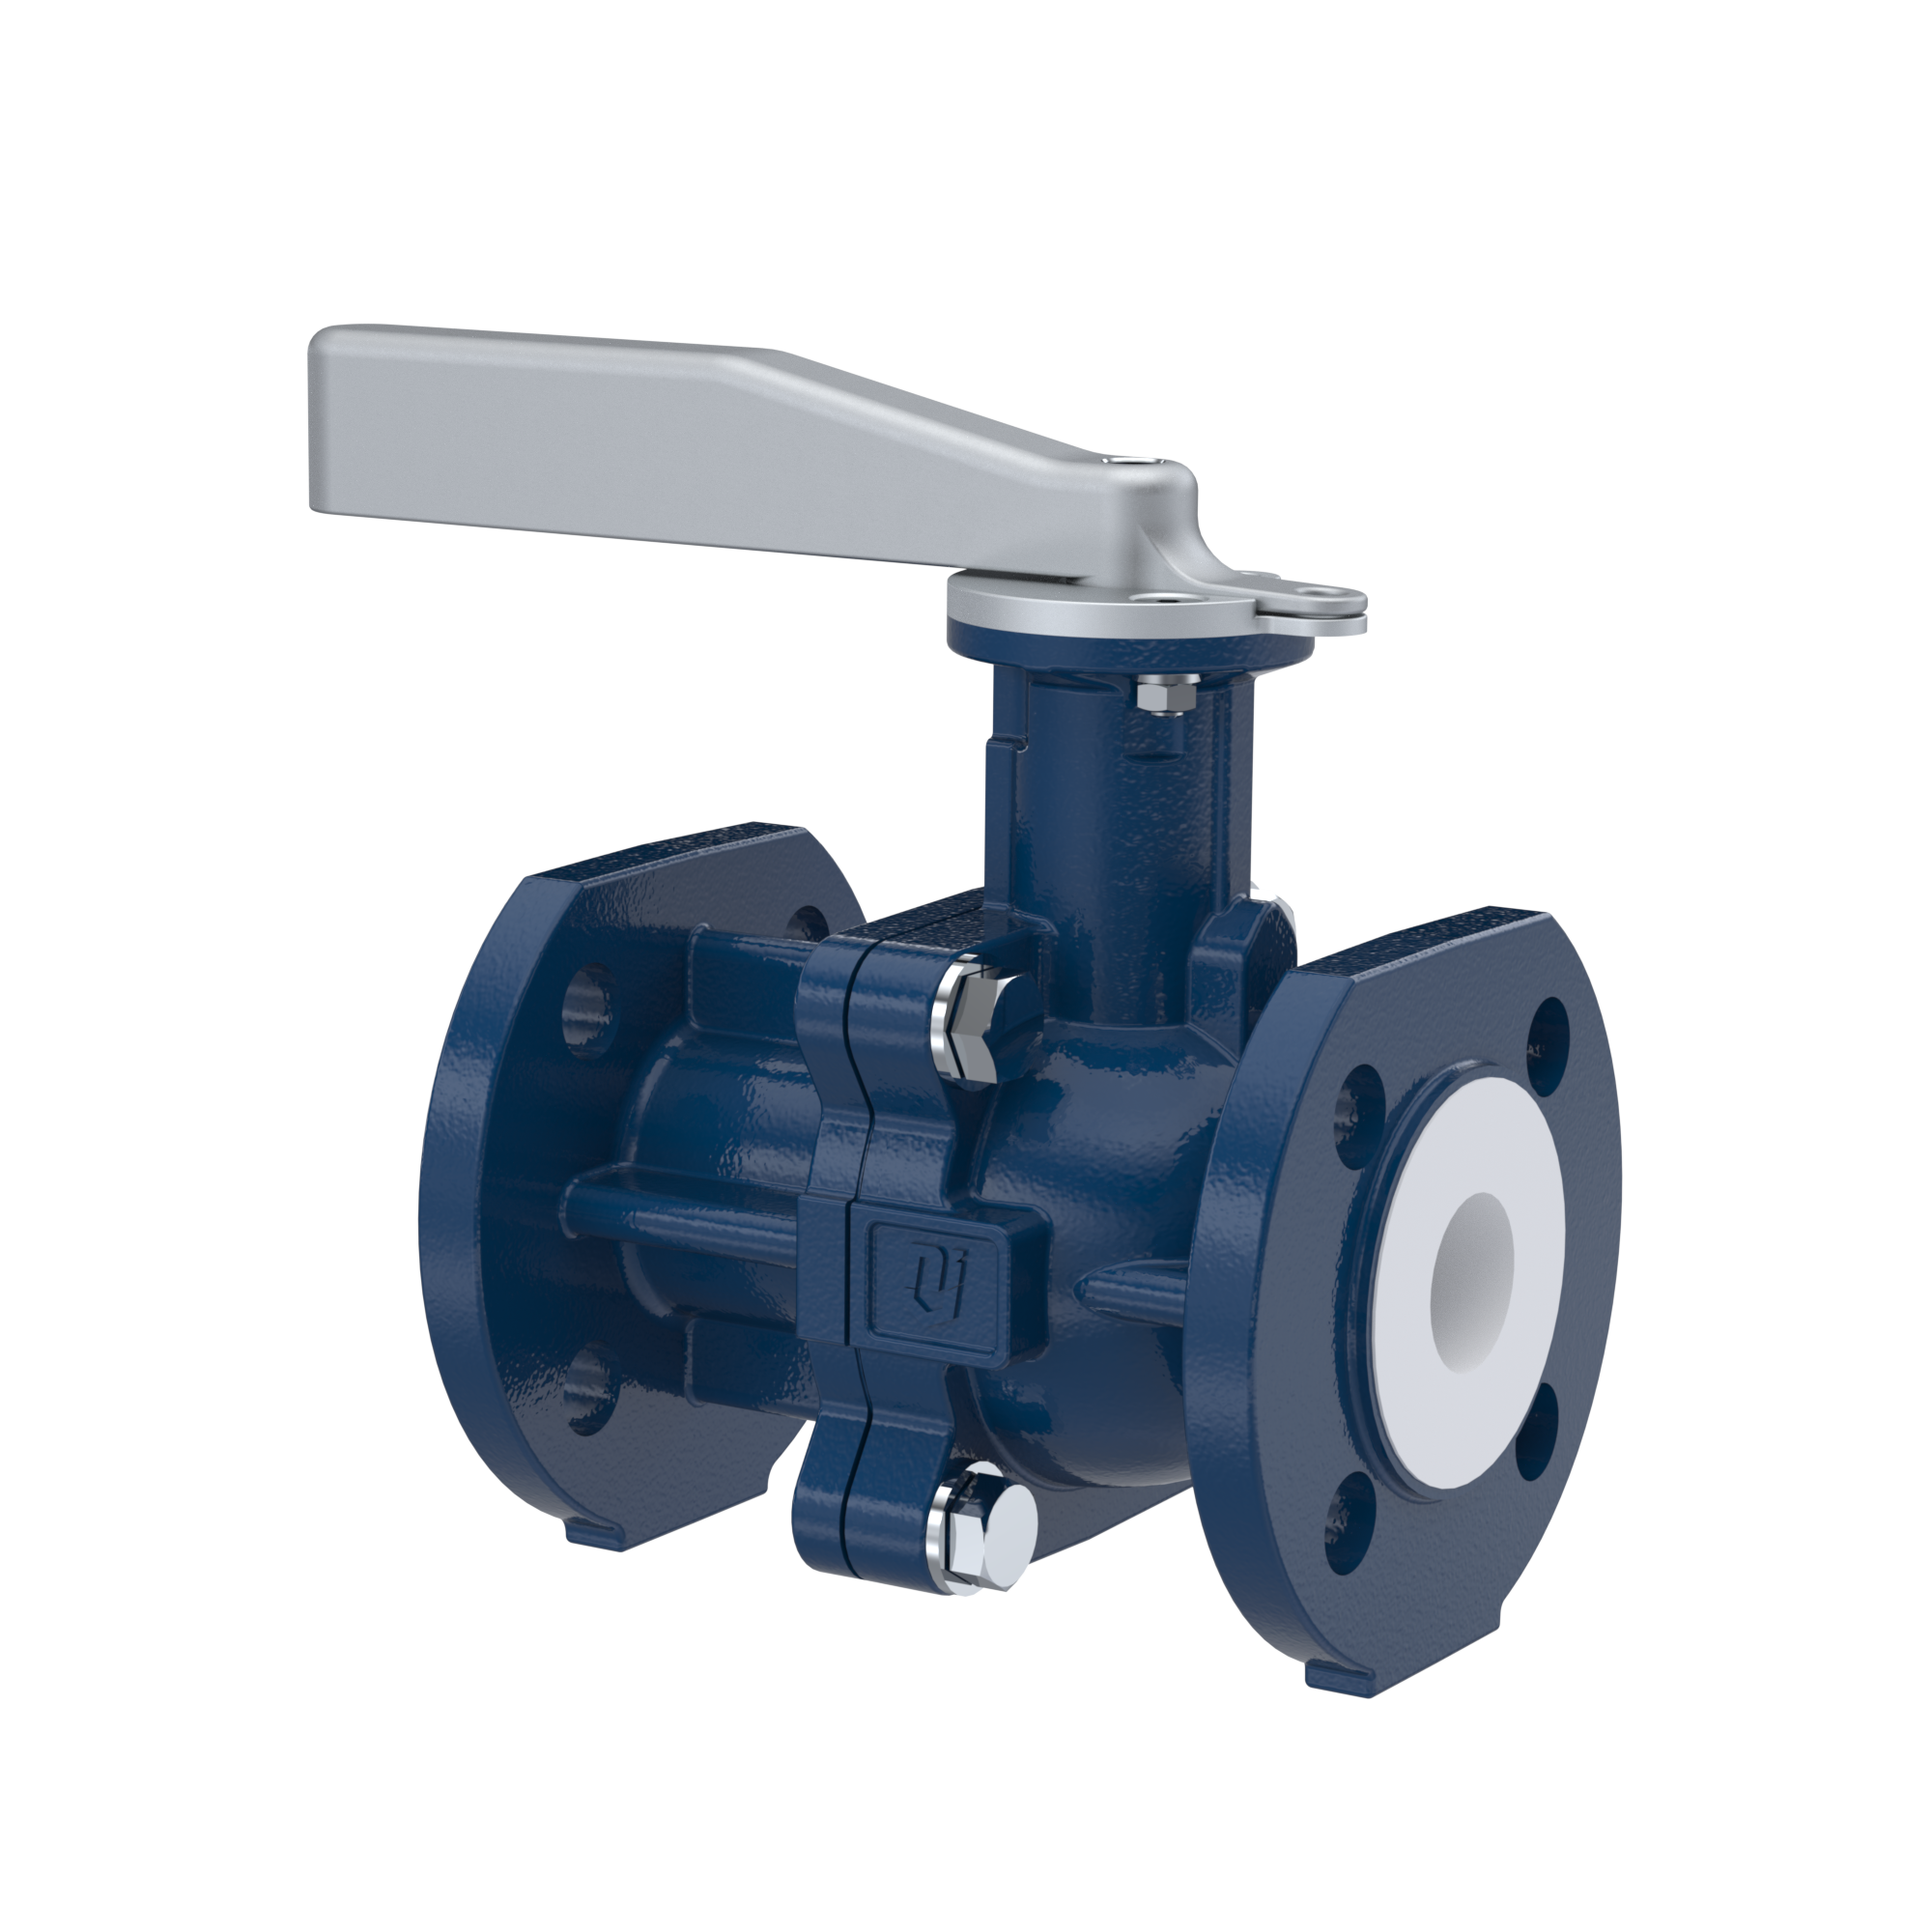 PFA-flange ball valve FK13 DN20 - 3/4" inch PN10/16 made of spheroidal graphite cast iron with lever hand